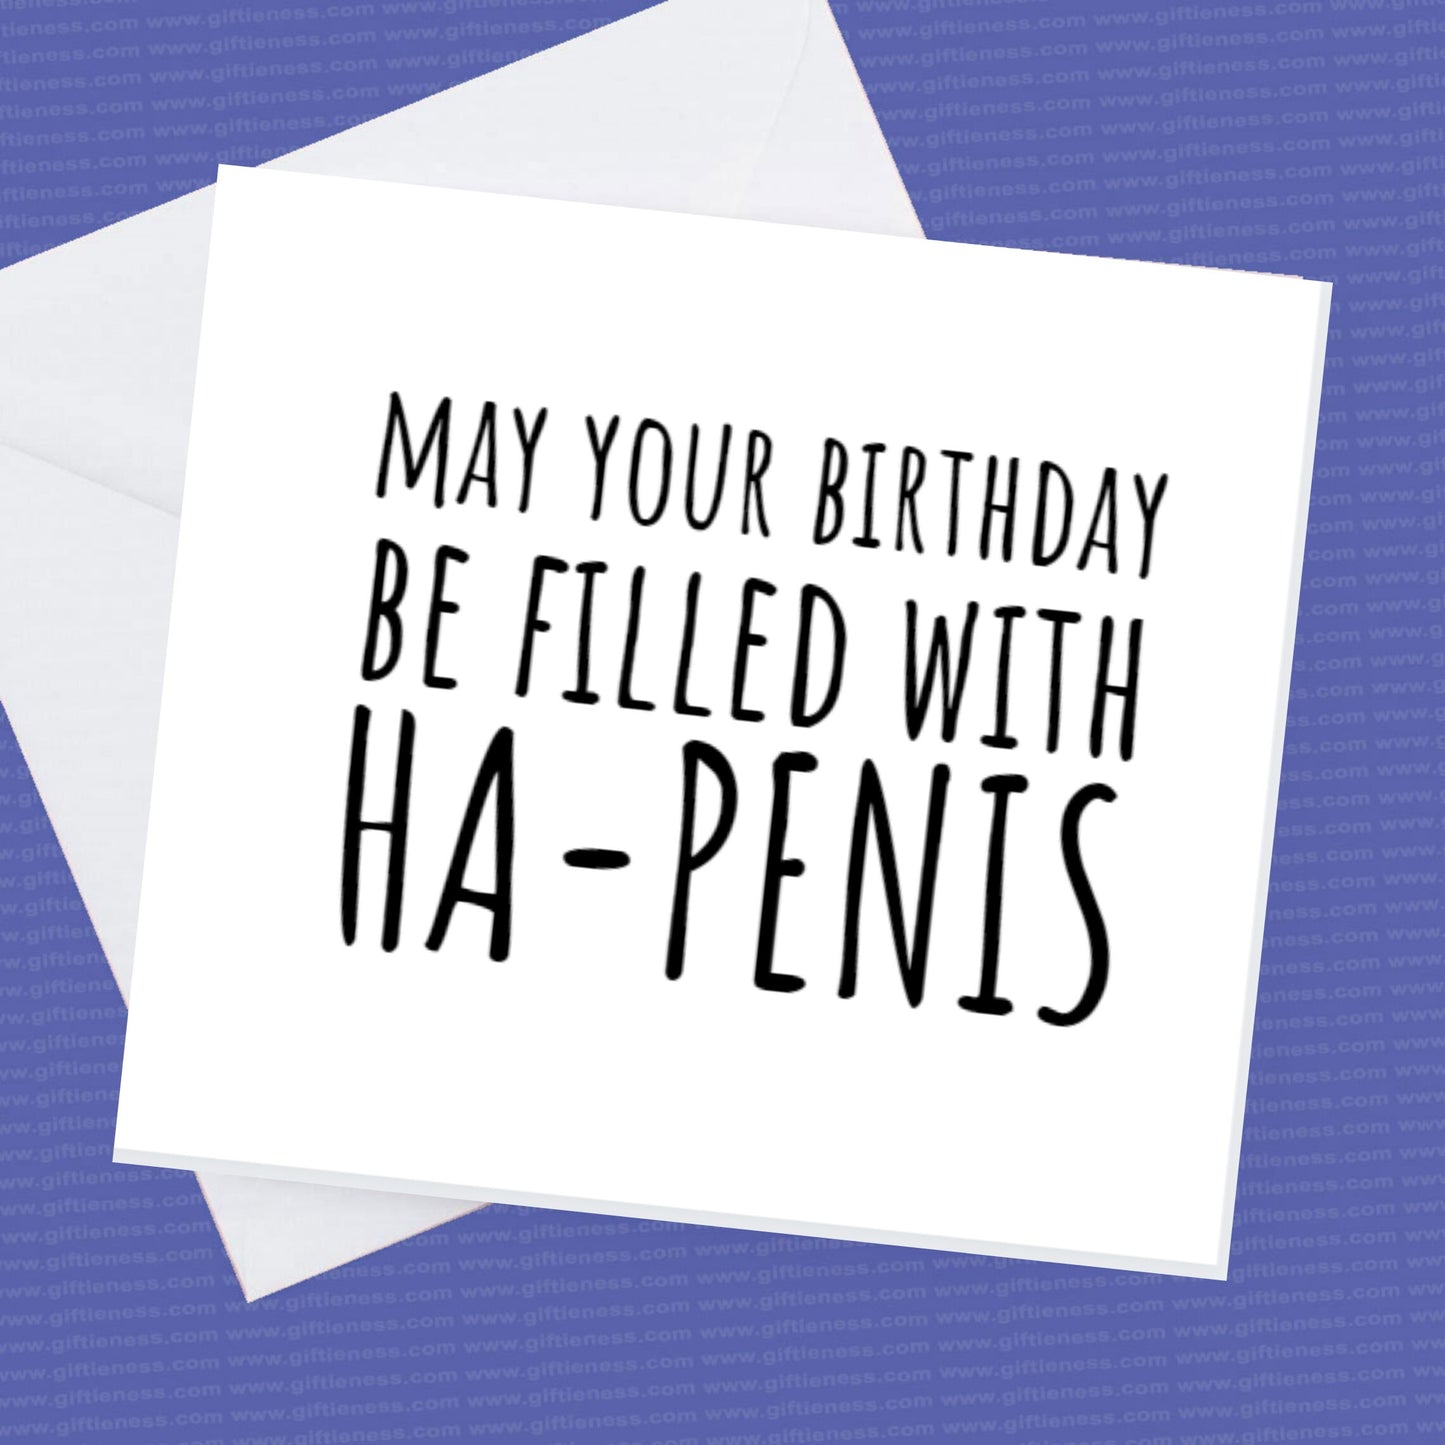 Birthday Card May your birthday be filled with ha-penis